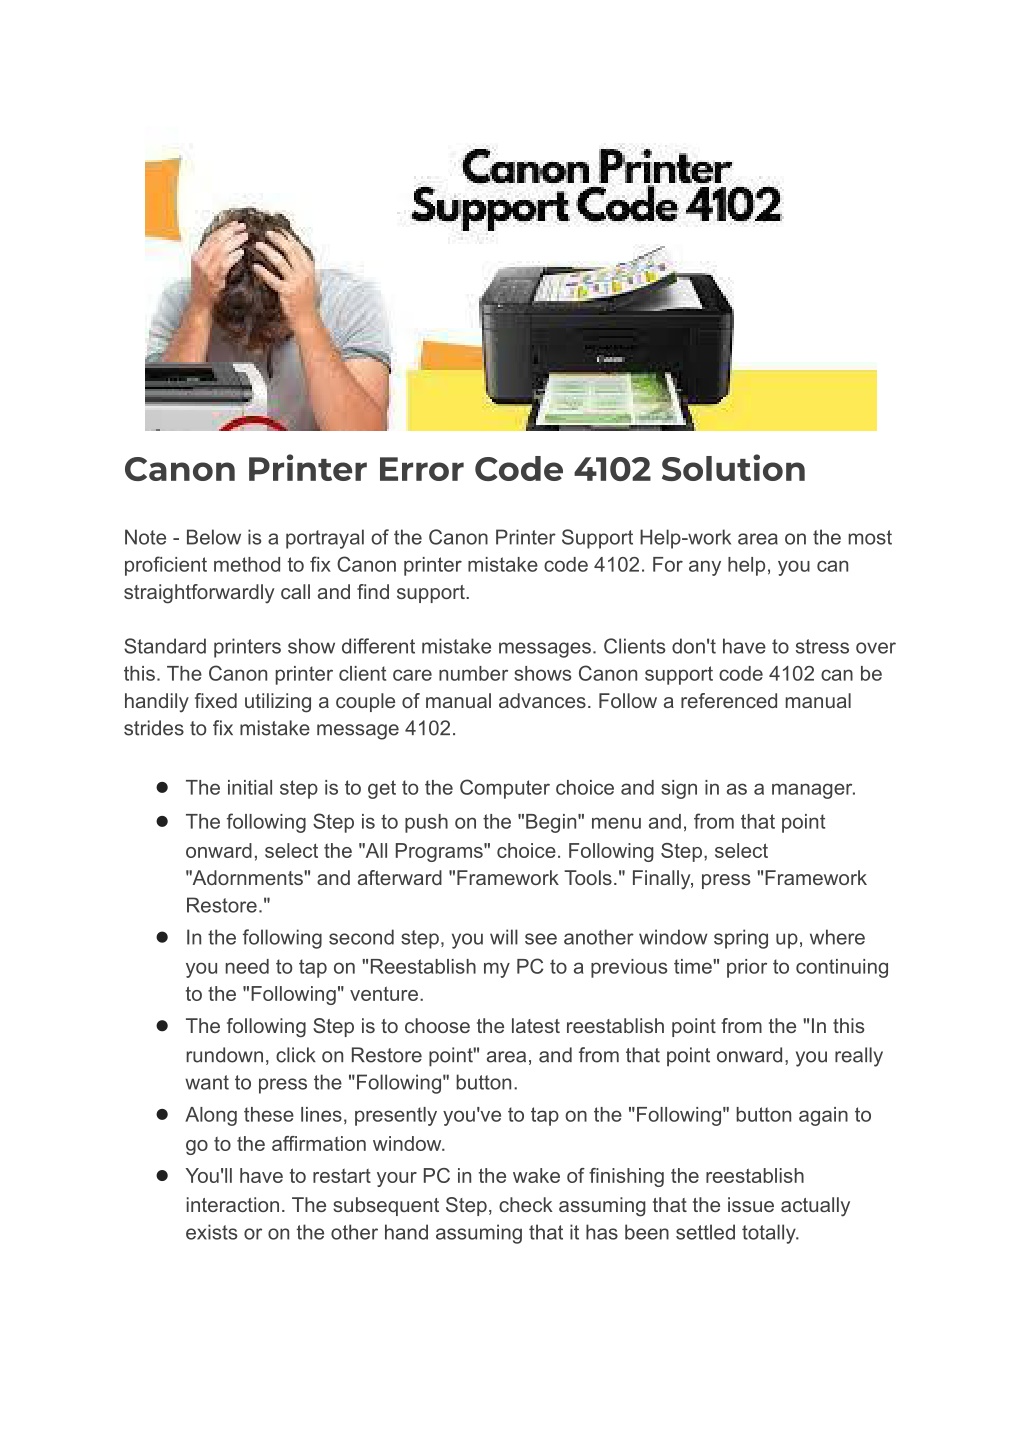 Ppt Step By Step Method To Fix Canon Printer Error Code 4102 Powerpoint Presentation Id11332170 2773